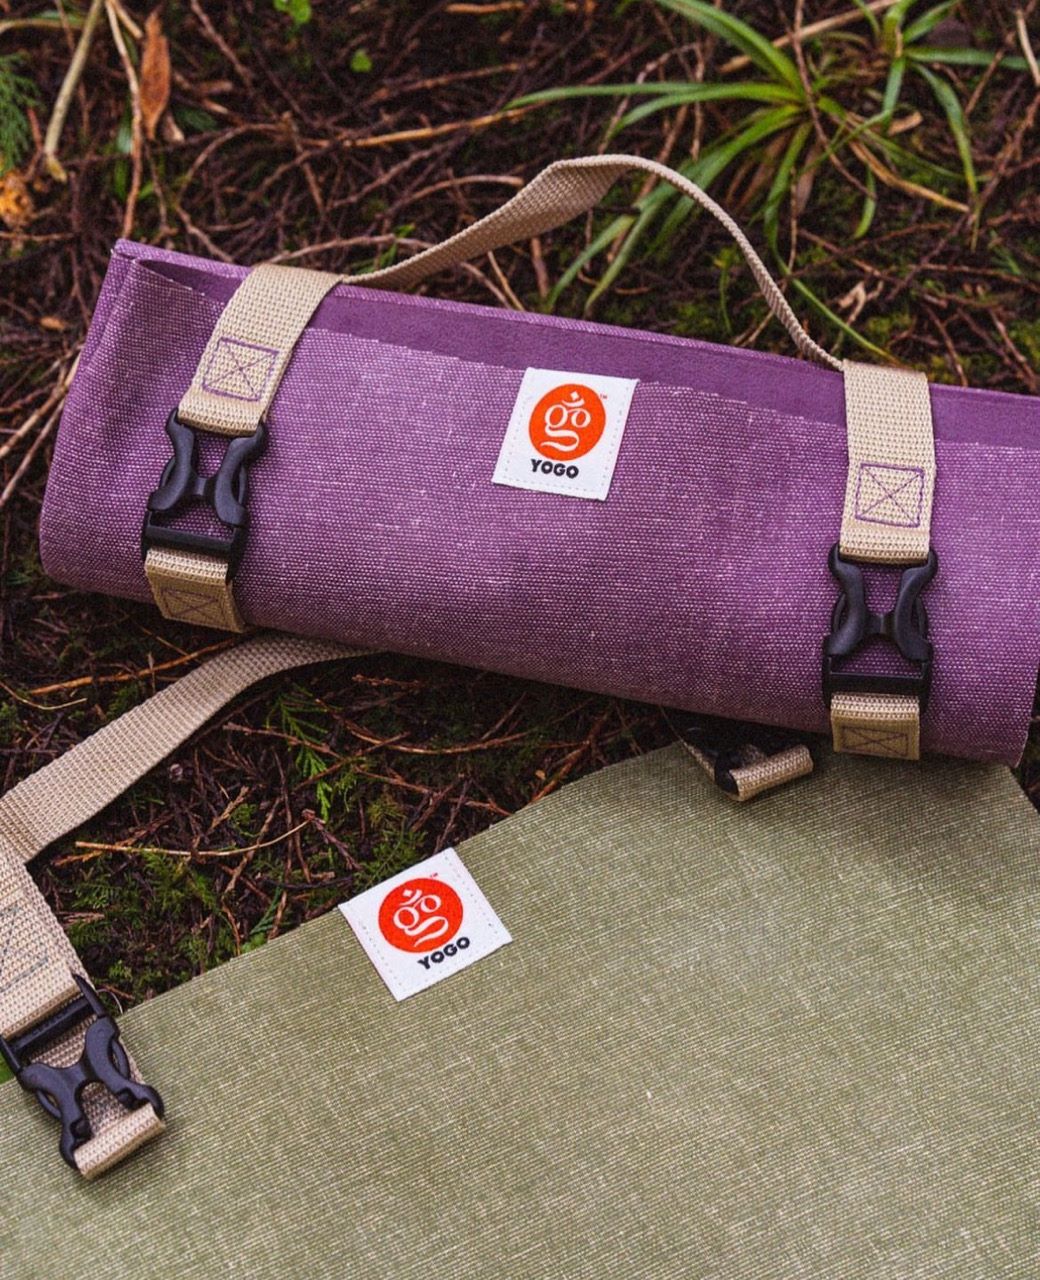 An image of two of YOGO's travel yoga mats.